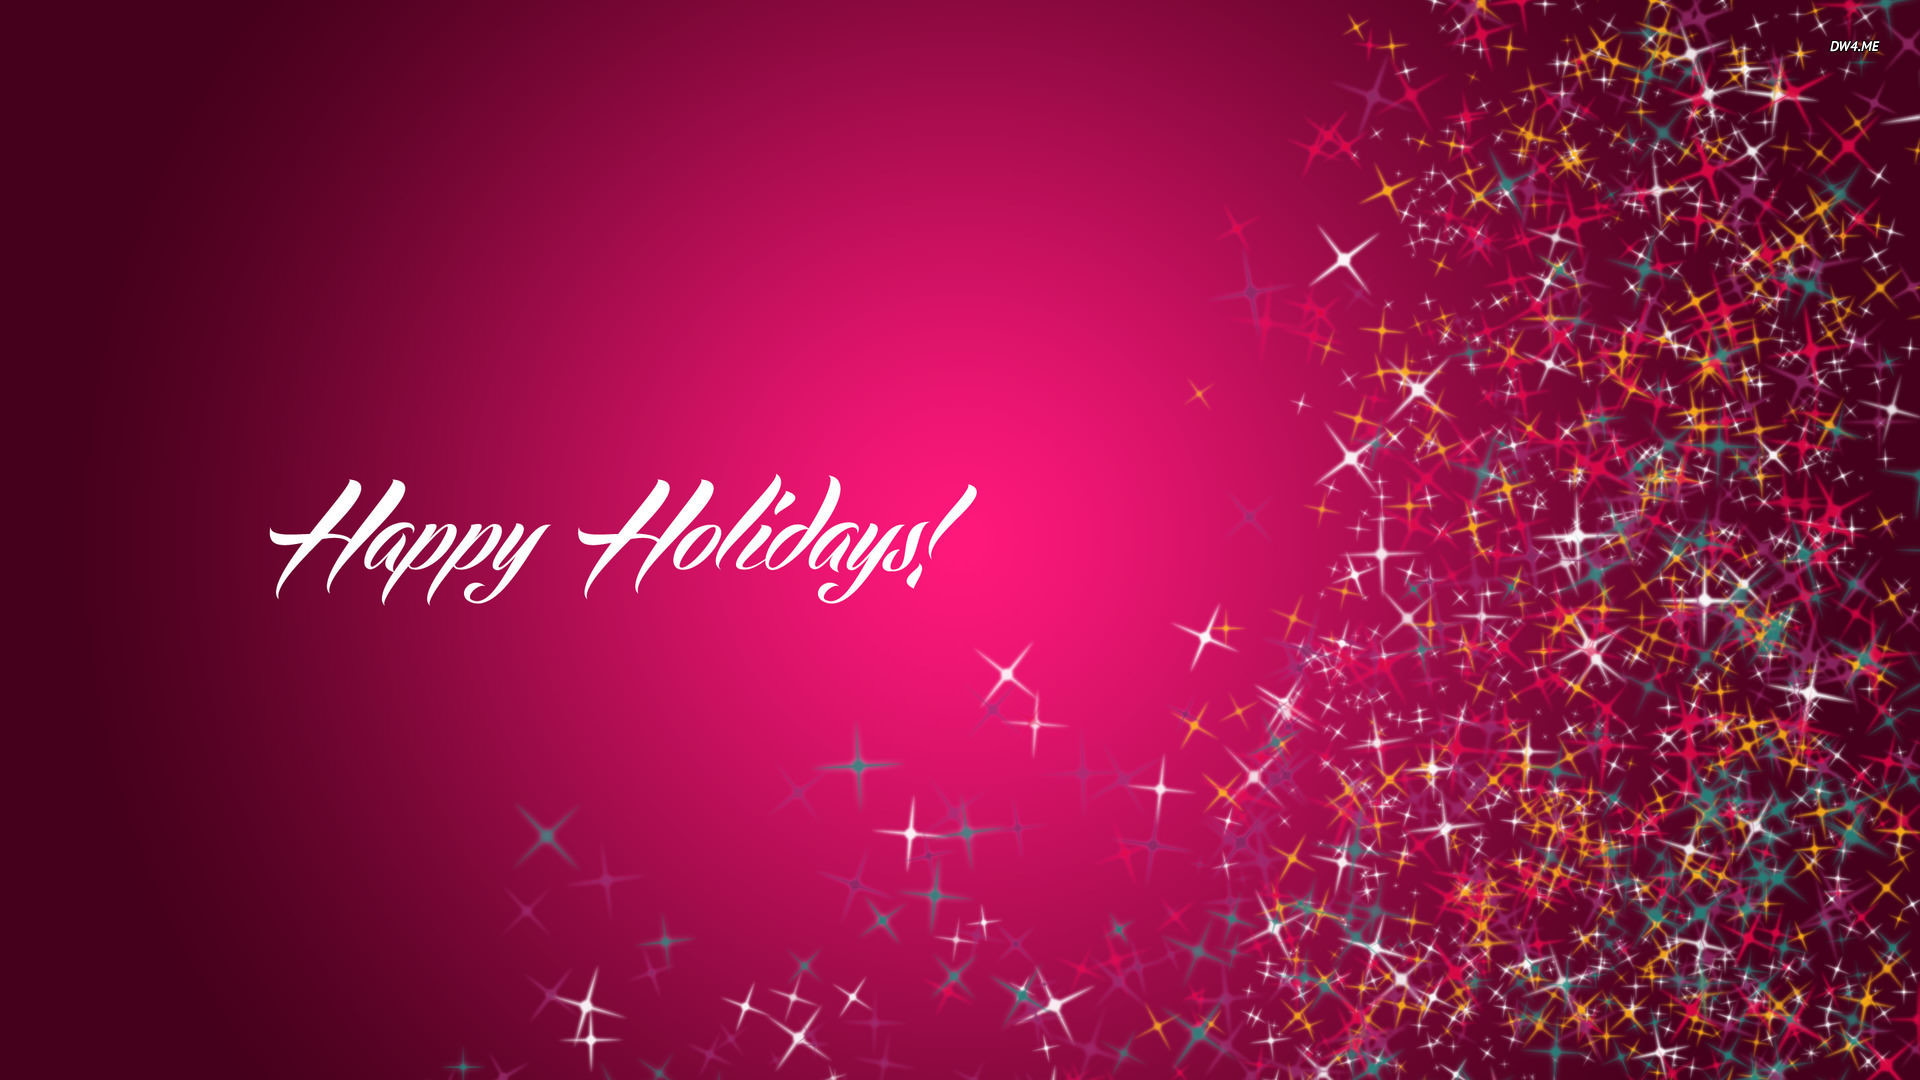 1920x1080 Simple Holiday Wallpaper